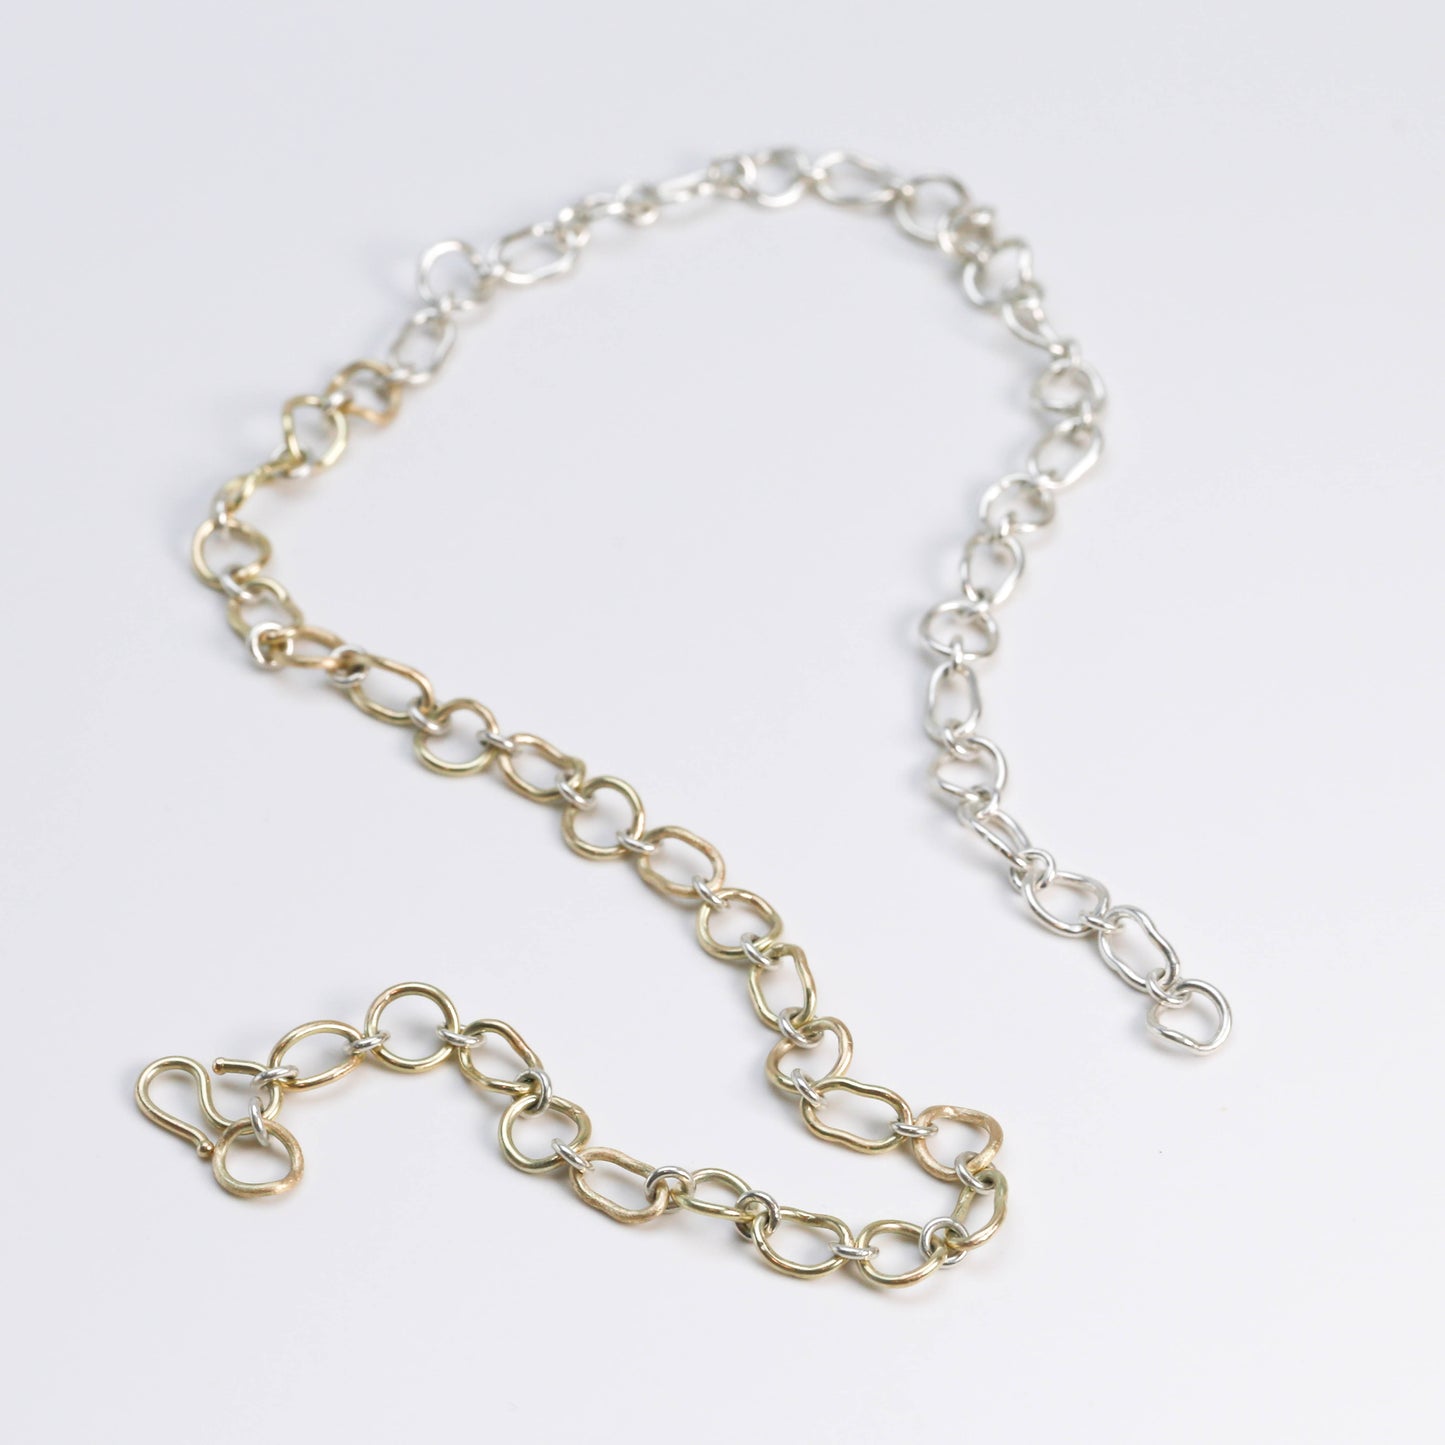 CONTOUR CHAIN - SG 999 & 14K Handcrafted Chain Necklace